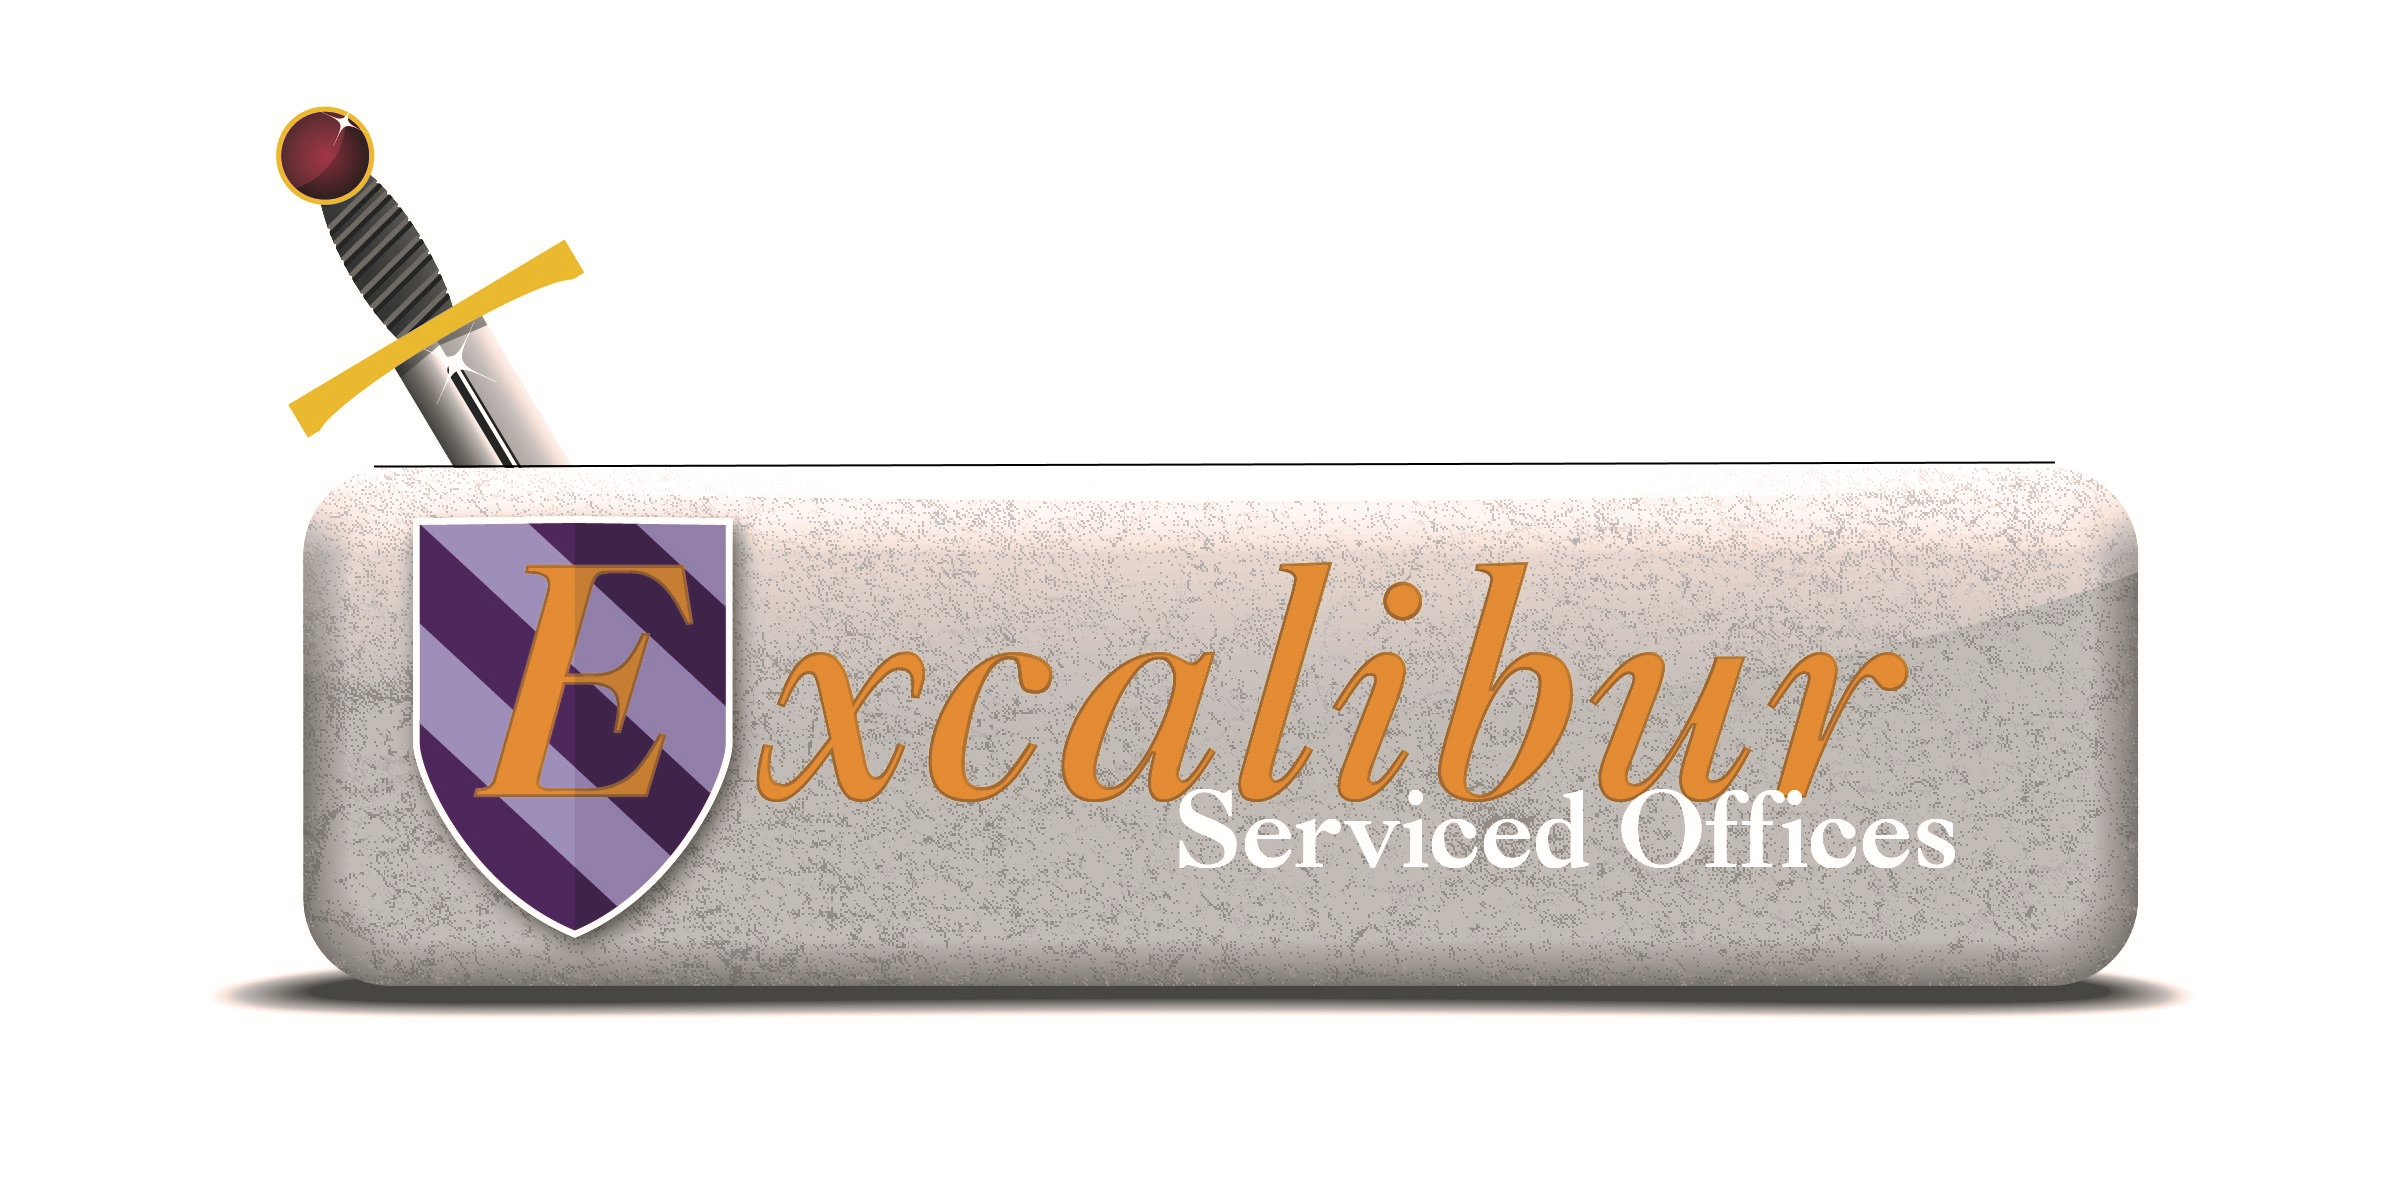 Excalibur Serviced Offices